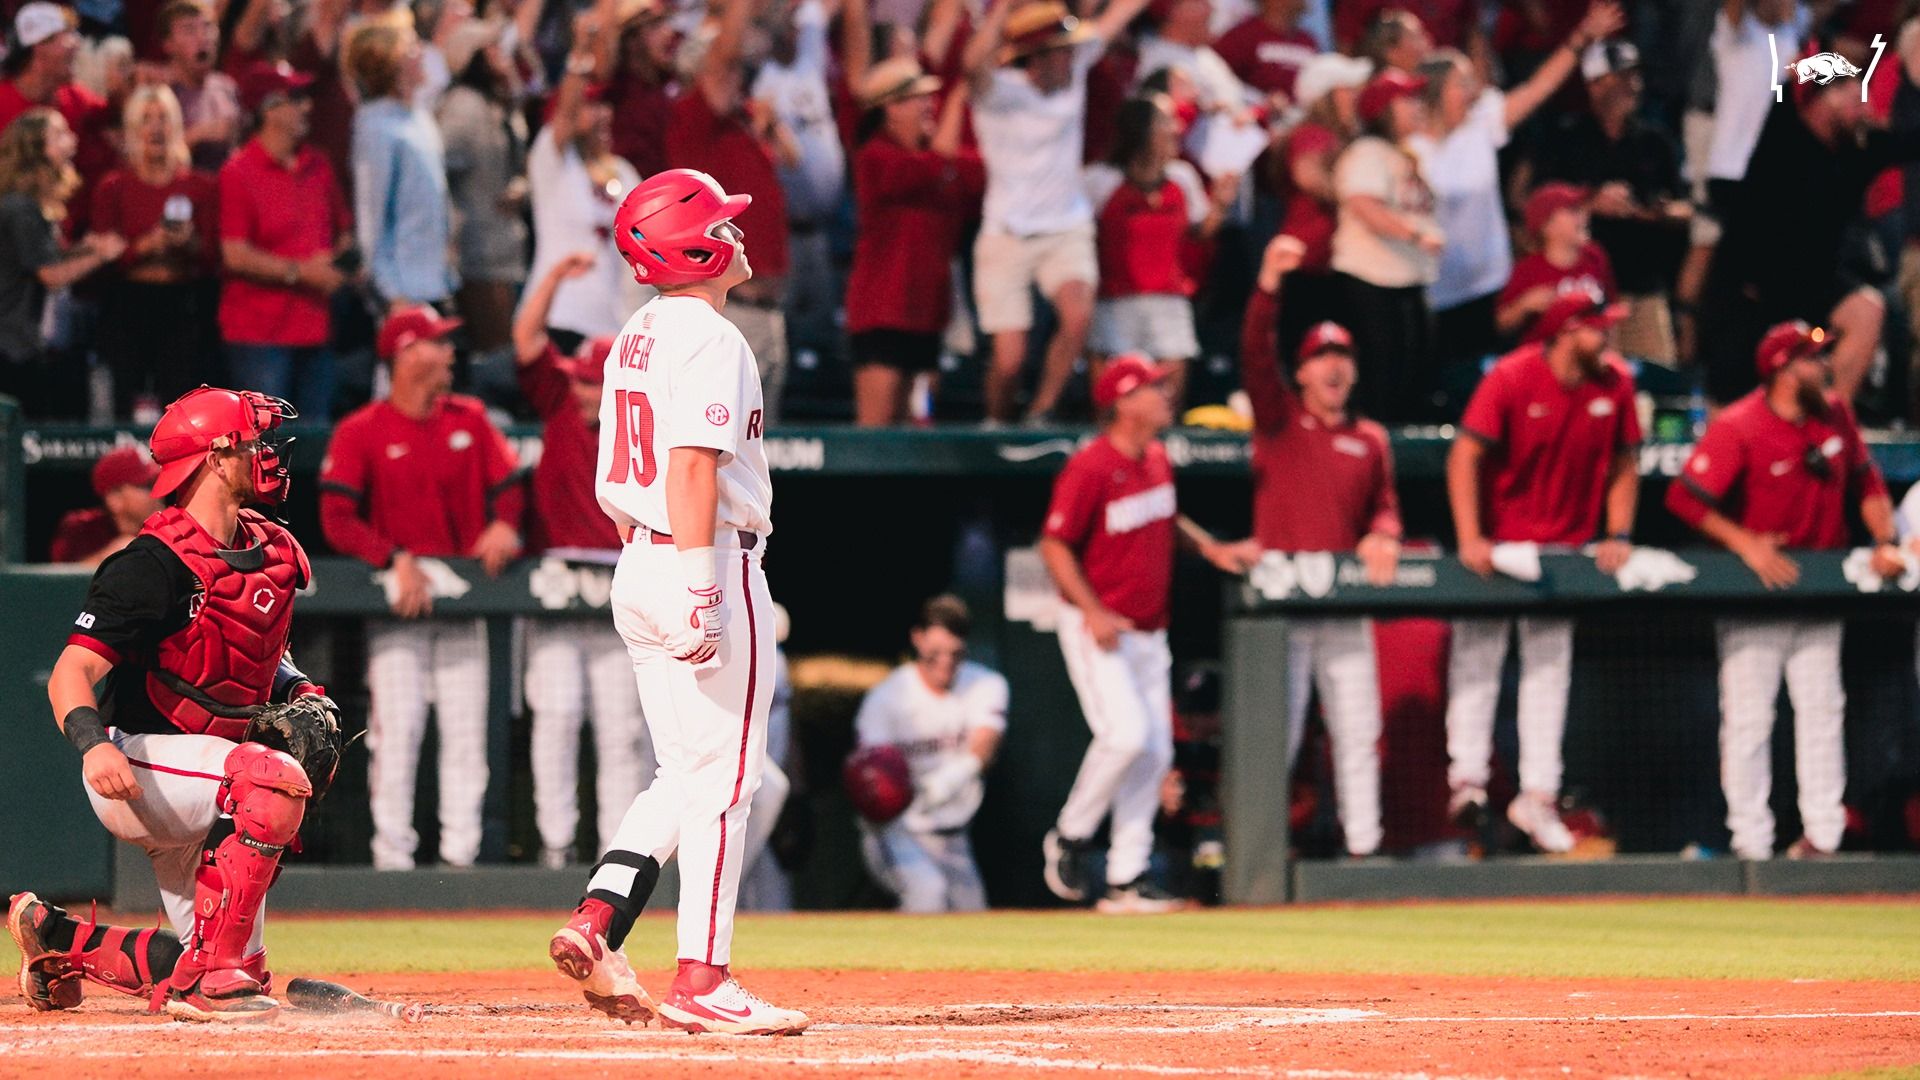 Three homers, Kopps' mound mastery launches Hogs into Super Regional